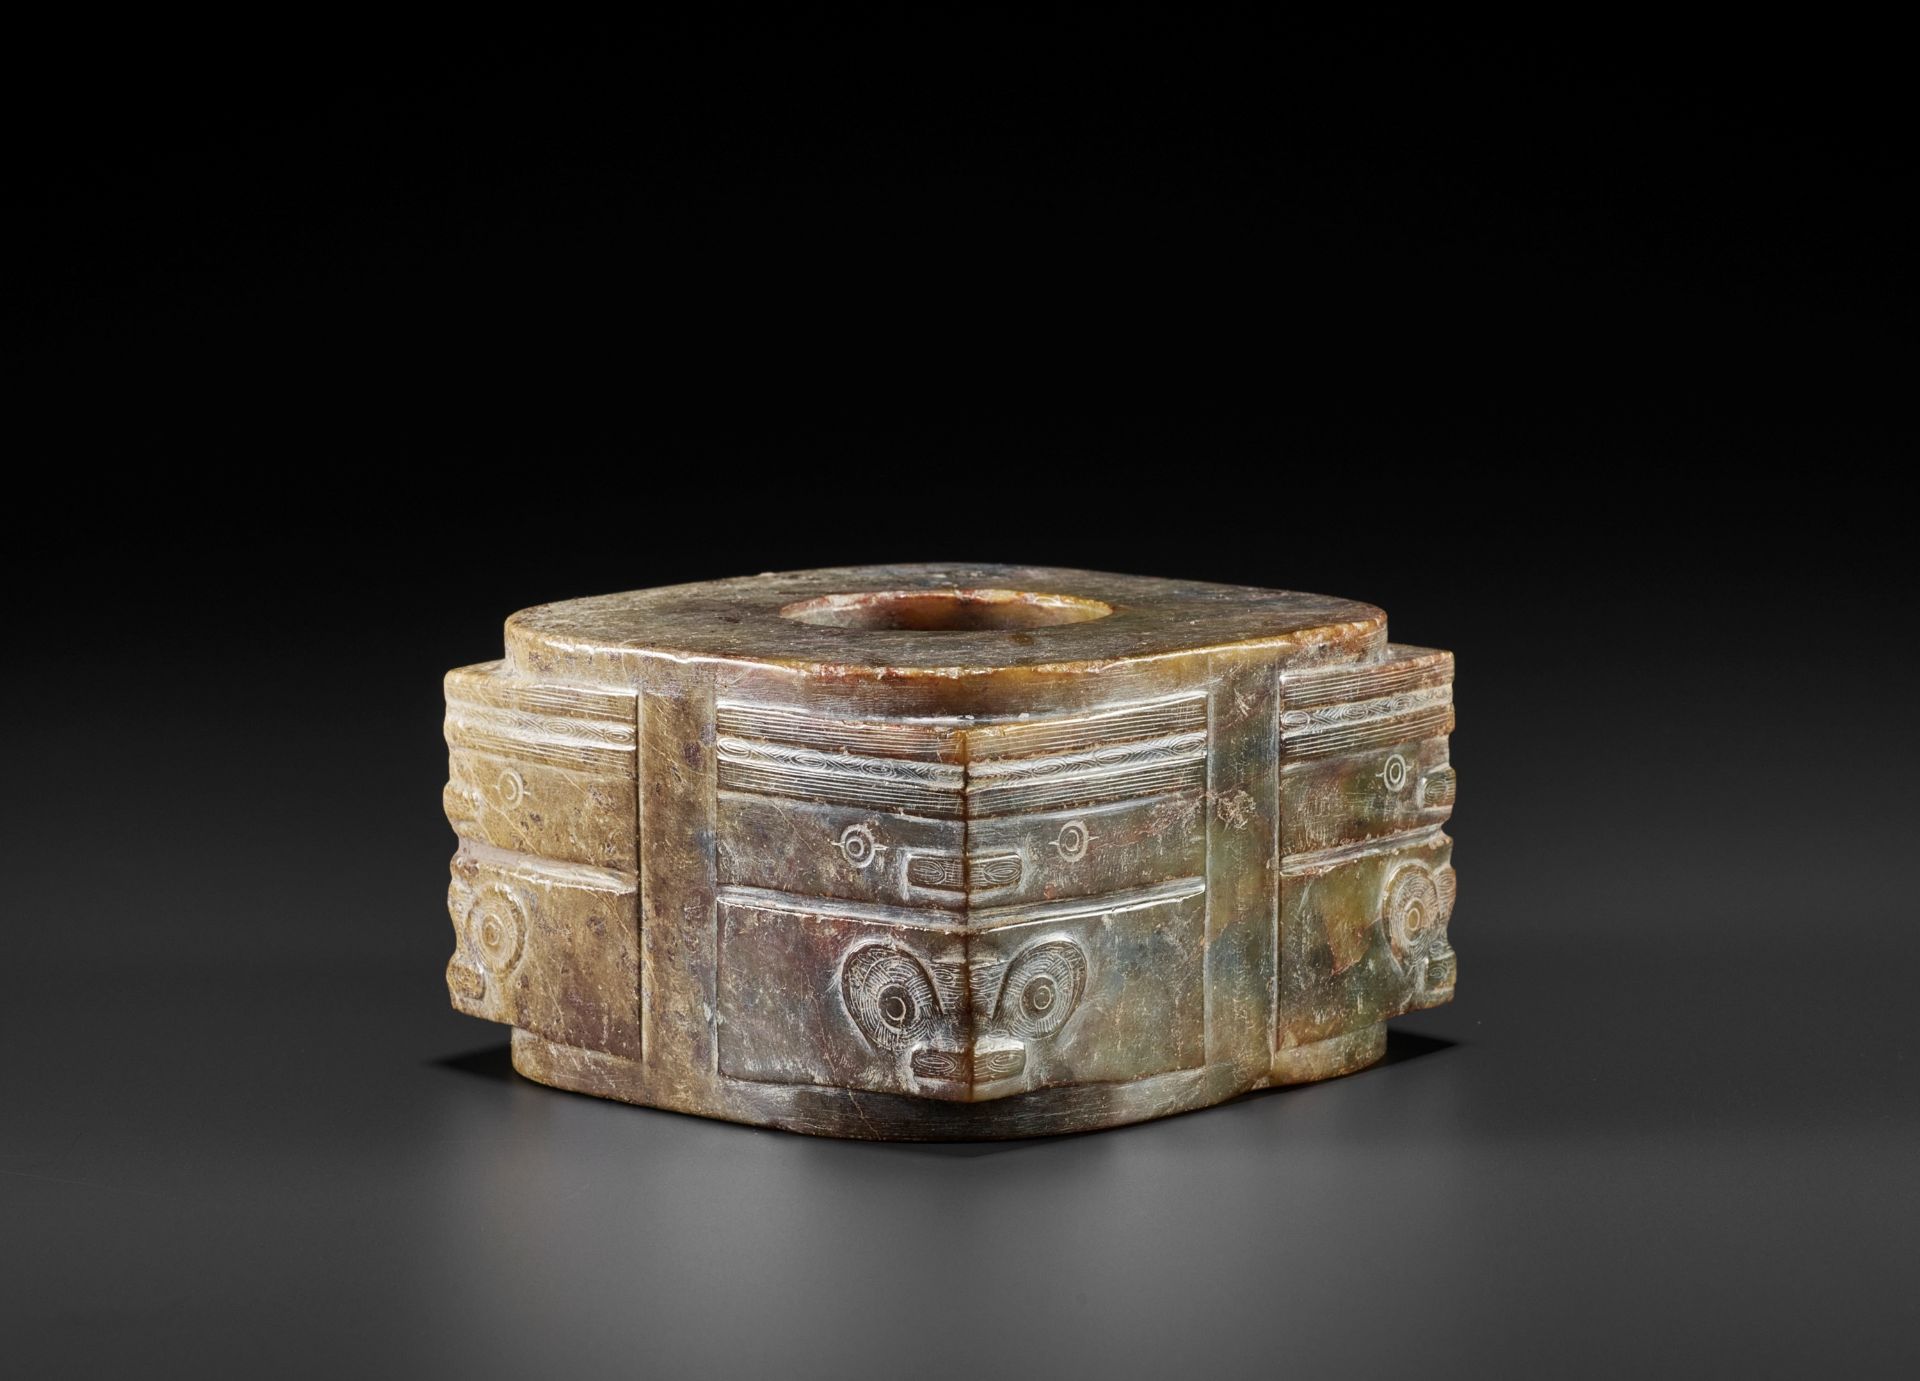 A RARE AND MASSIVE MOTTLED JADE CONG, LIANGZHU CULTURE